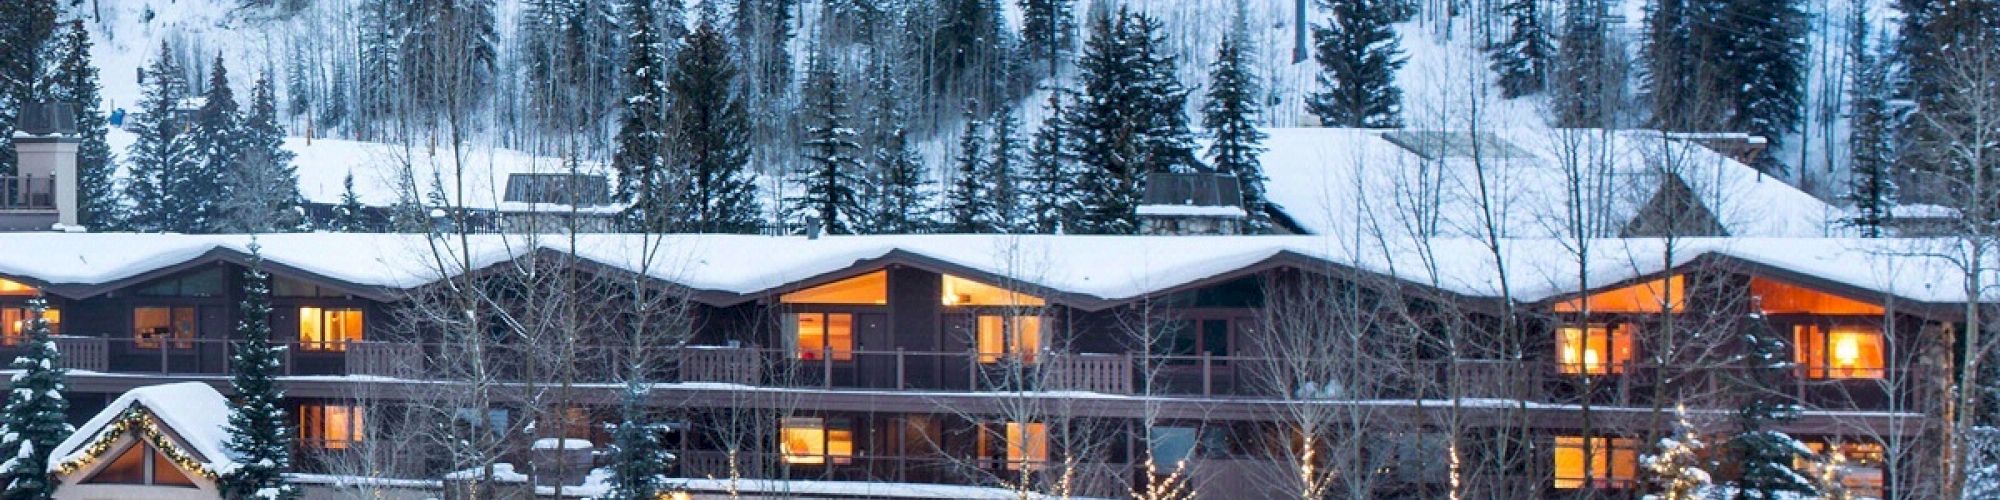 The image shows a cozy, illuminated mountain lodge nestled in a snowy landscape with pine trees and nearby ski slopes in the background.